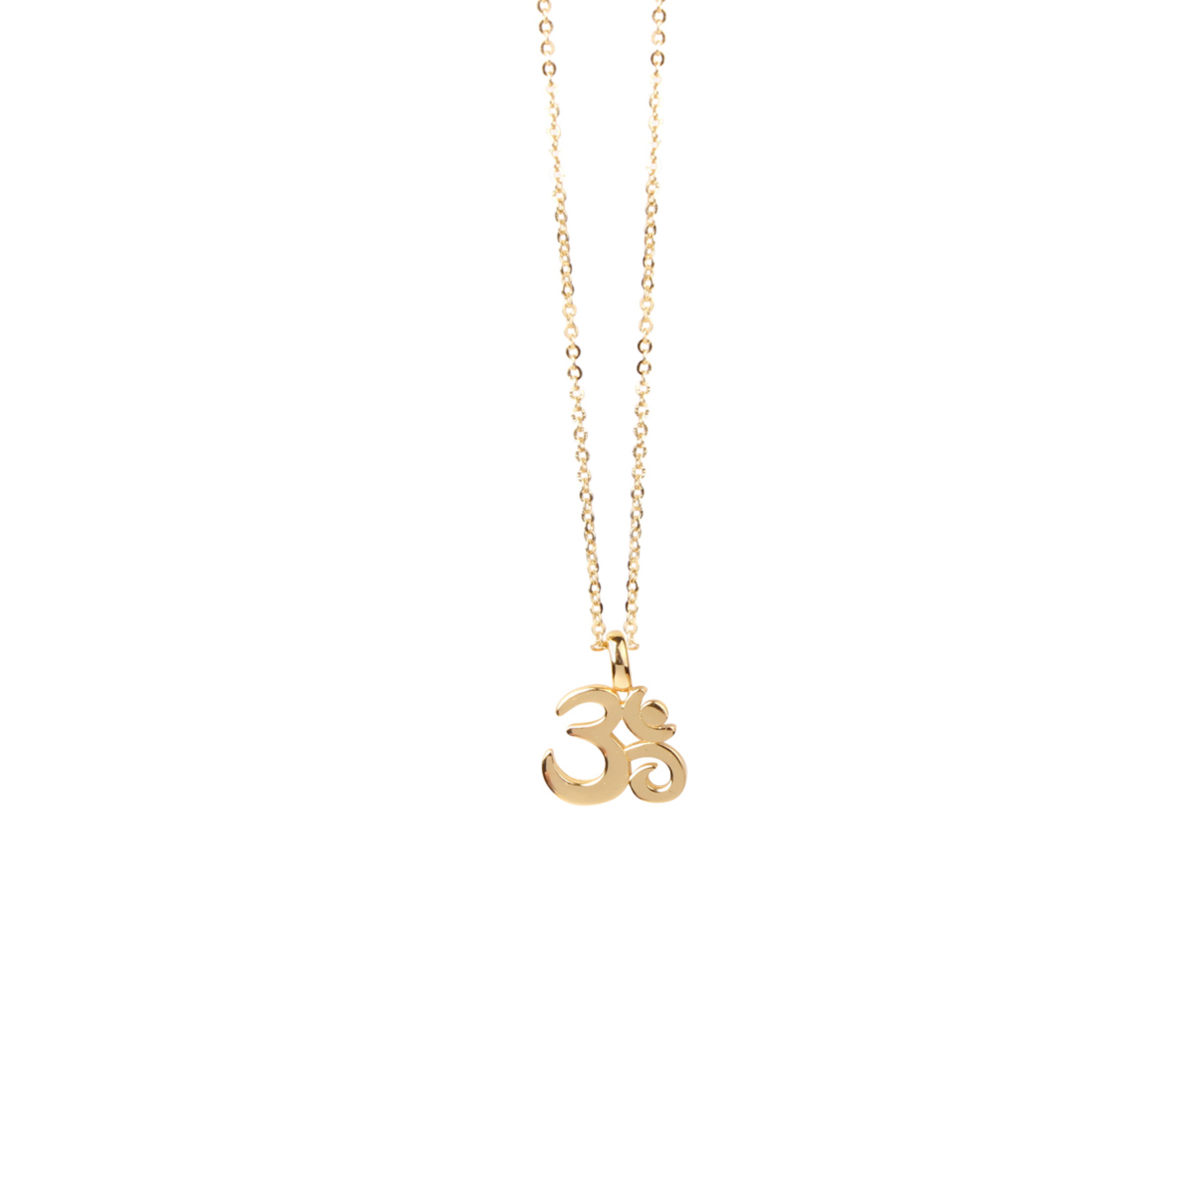 Discover DUNYA OM Necklace by Gosia Orlowska